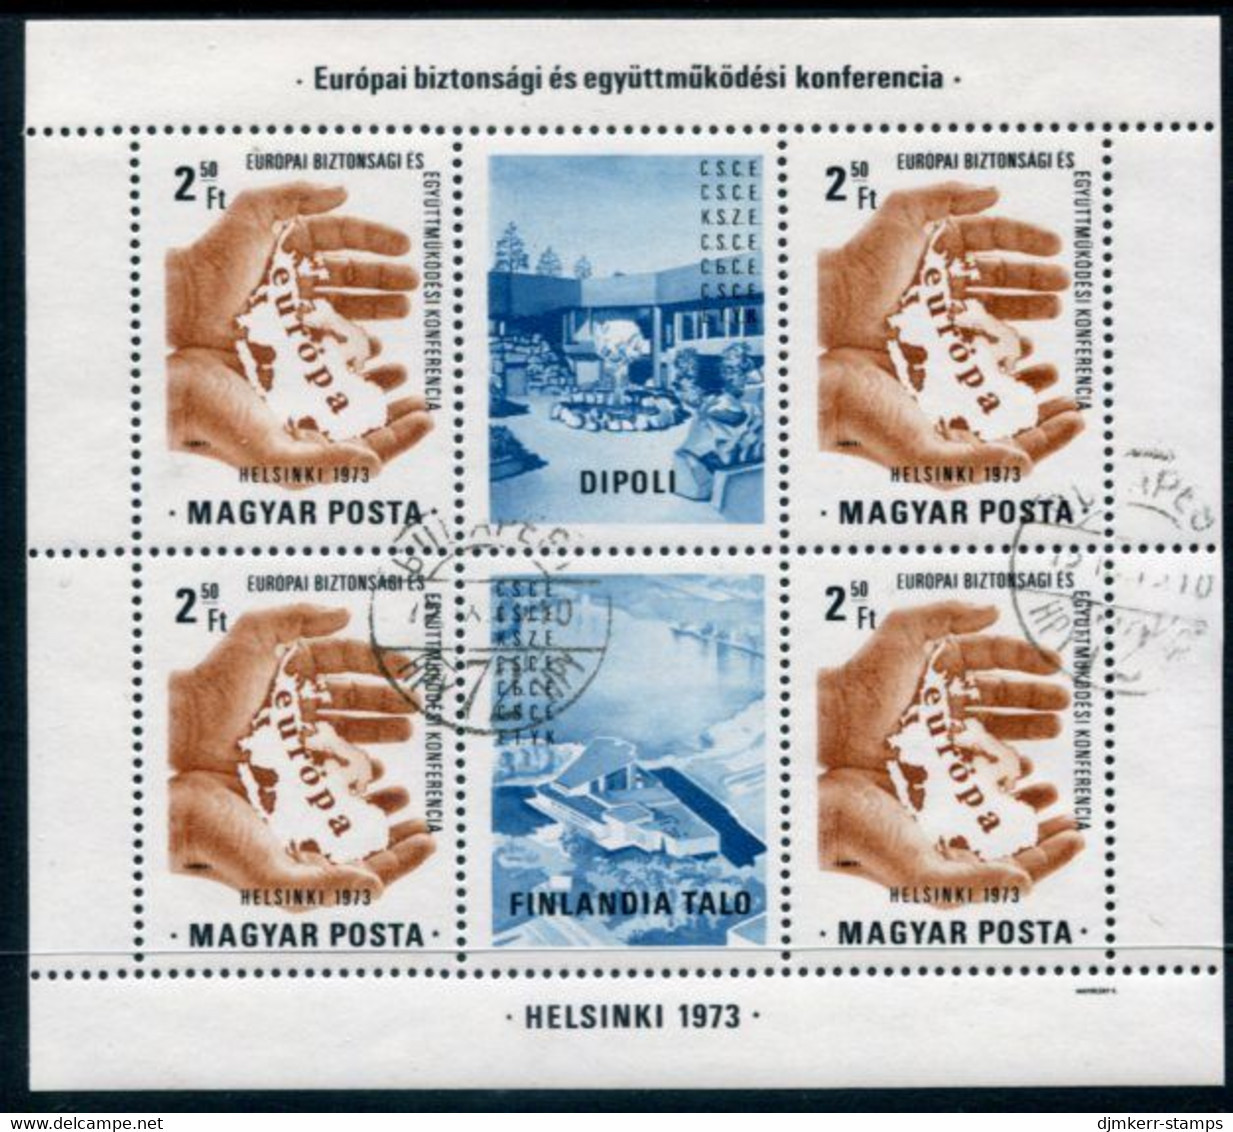 HUNGARY 1973 European Security Conference Block Used.  Michel Block 99 - Used Stamps